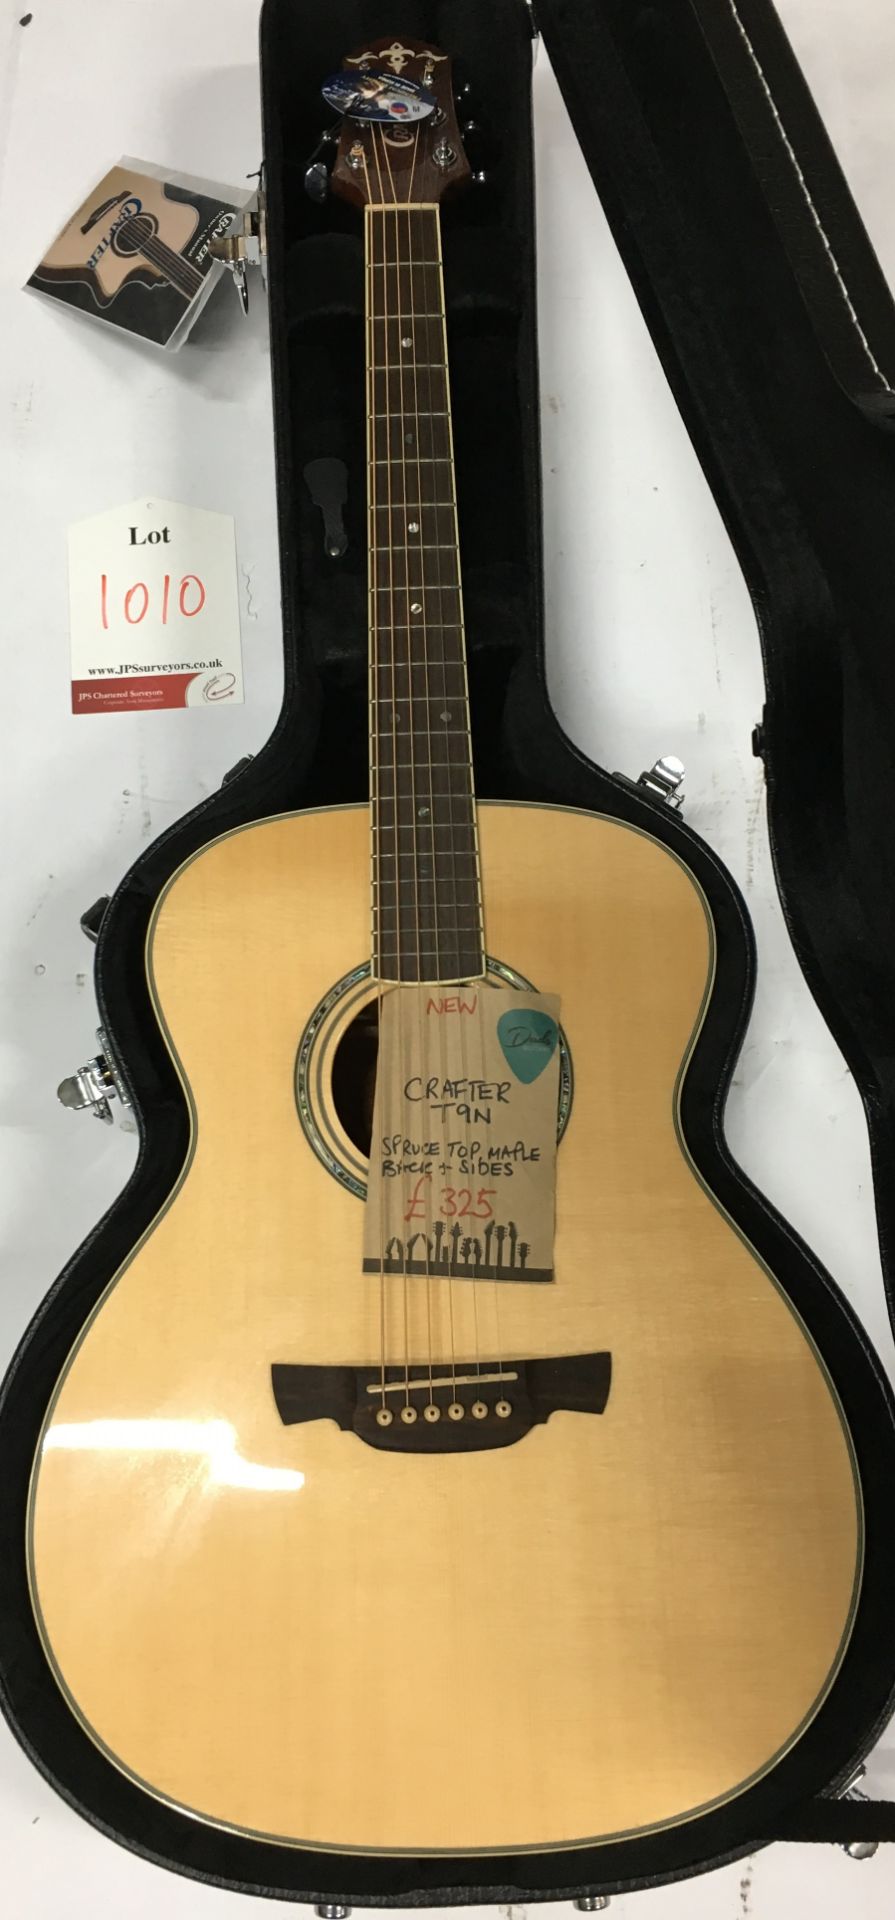 Crafter T9N Spruce Top Mable Back & Sides Acoustic Guitar | In Case | New | RRP £325 - Image 2 of 3